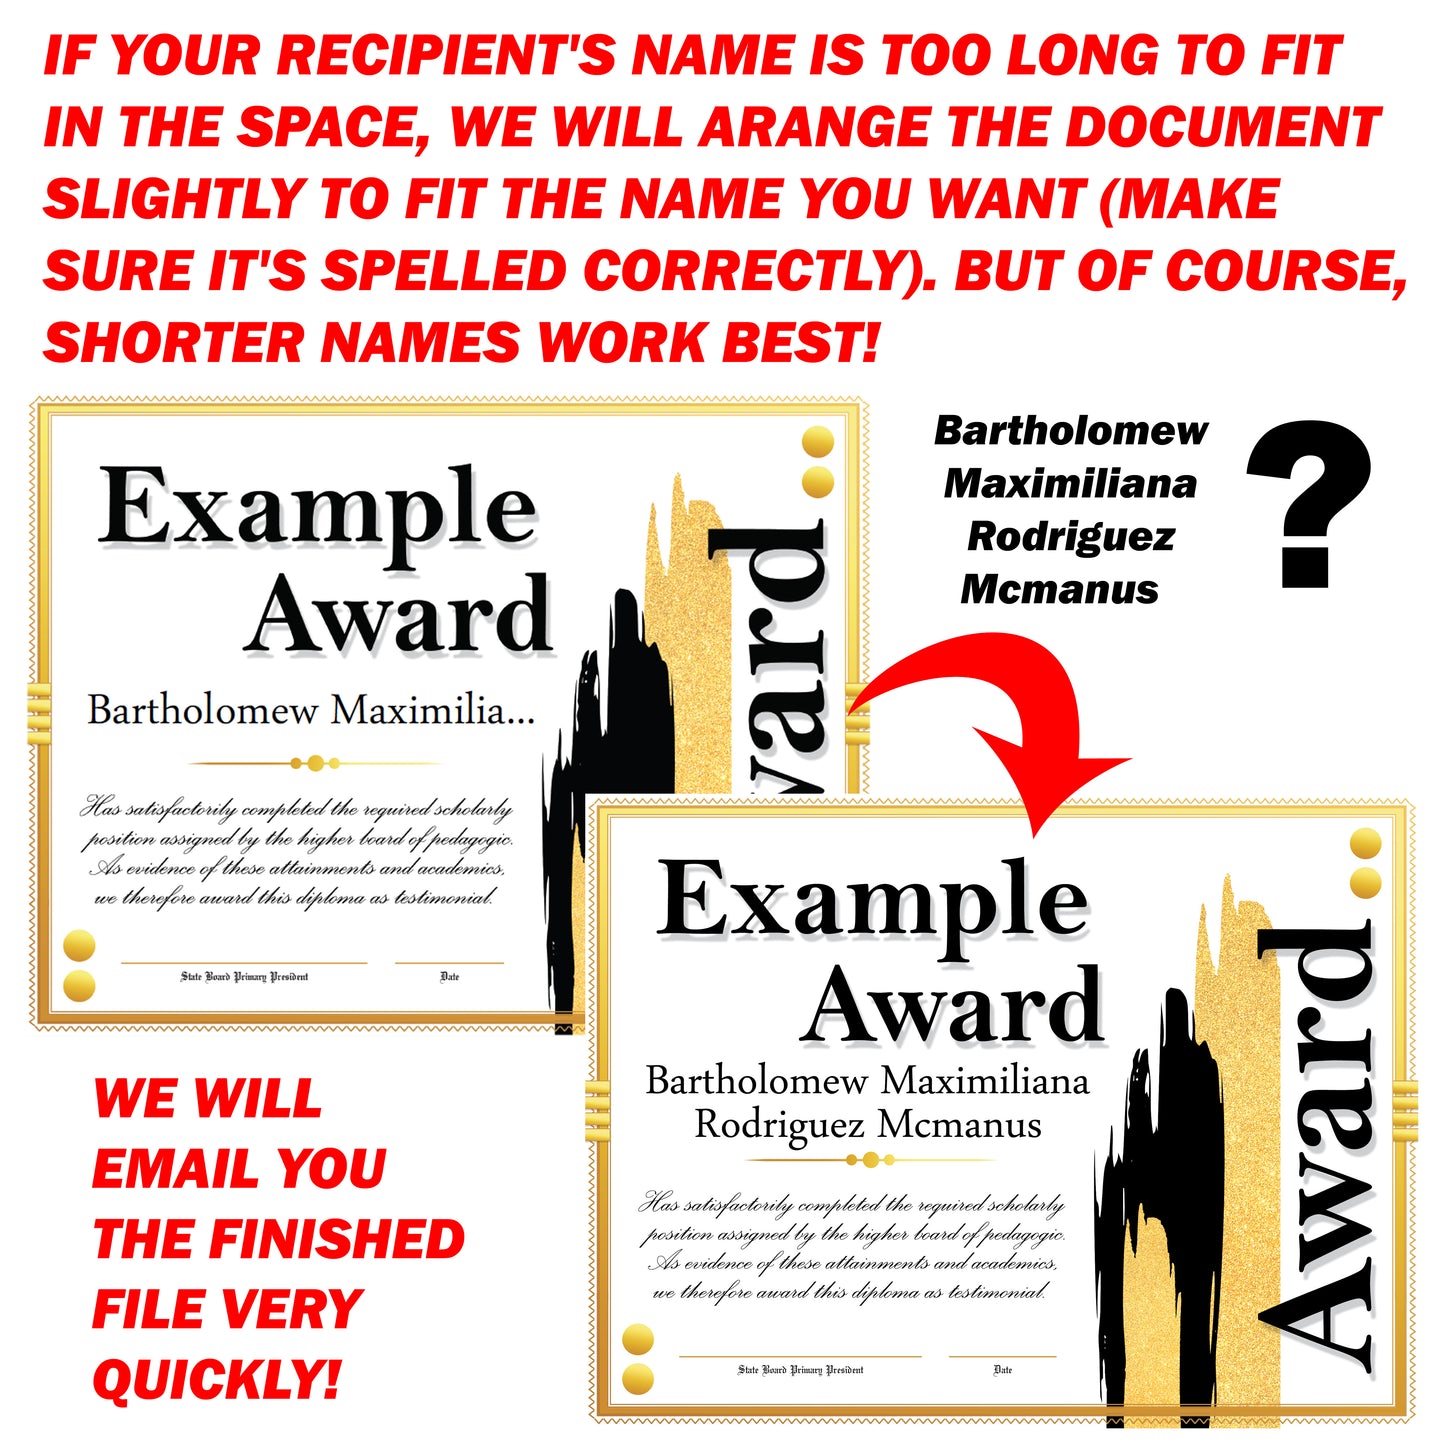 Asshole Award, Just Tell us the Recipient Name, and we'll Email you the Finished Award to Print!